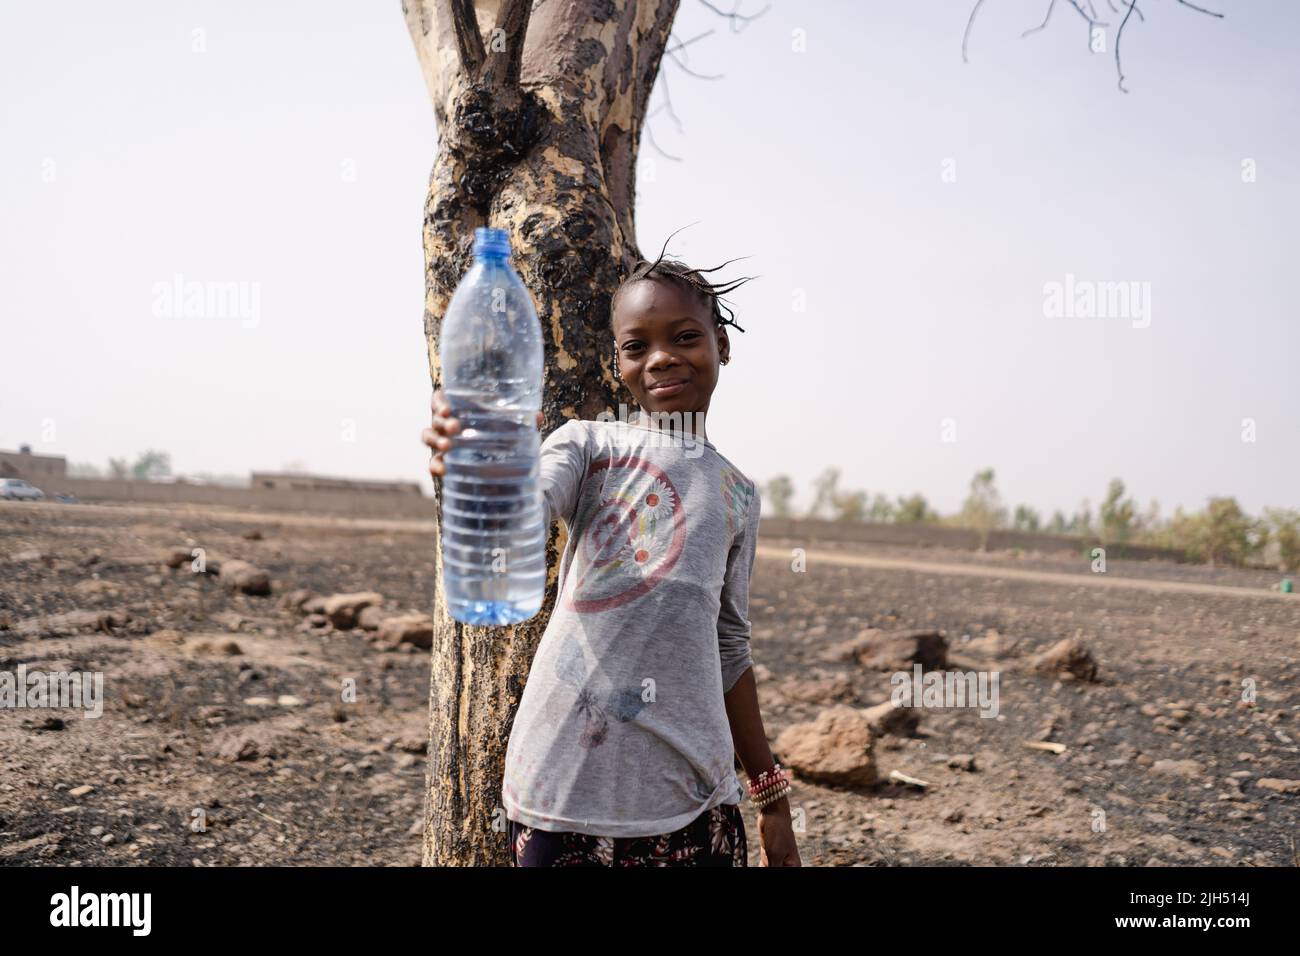 Beautiful little African girl standing in a dry stony field holding up an empty plastic bottle symbolizing water scarcity in the sub-Saharan region Stock Photo